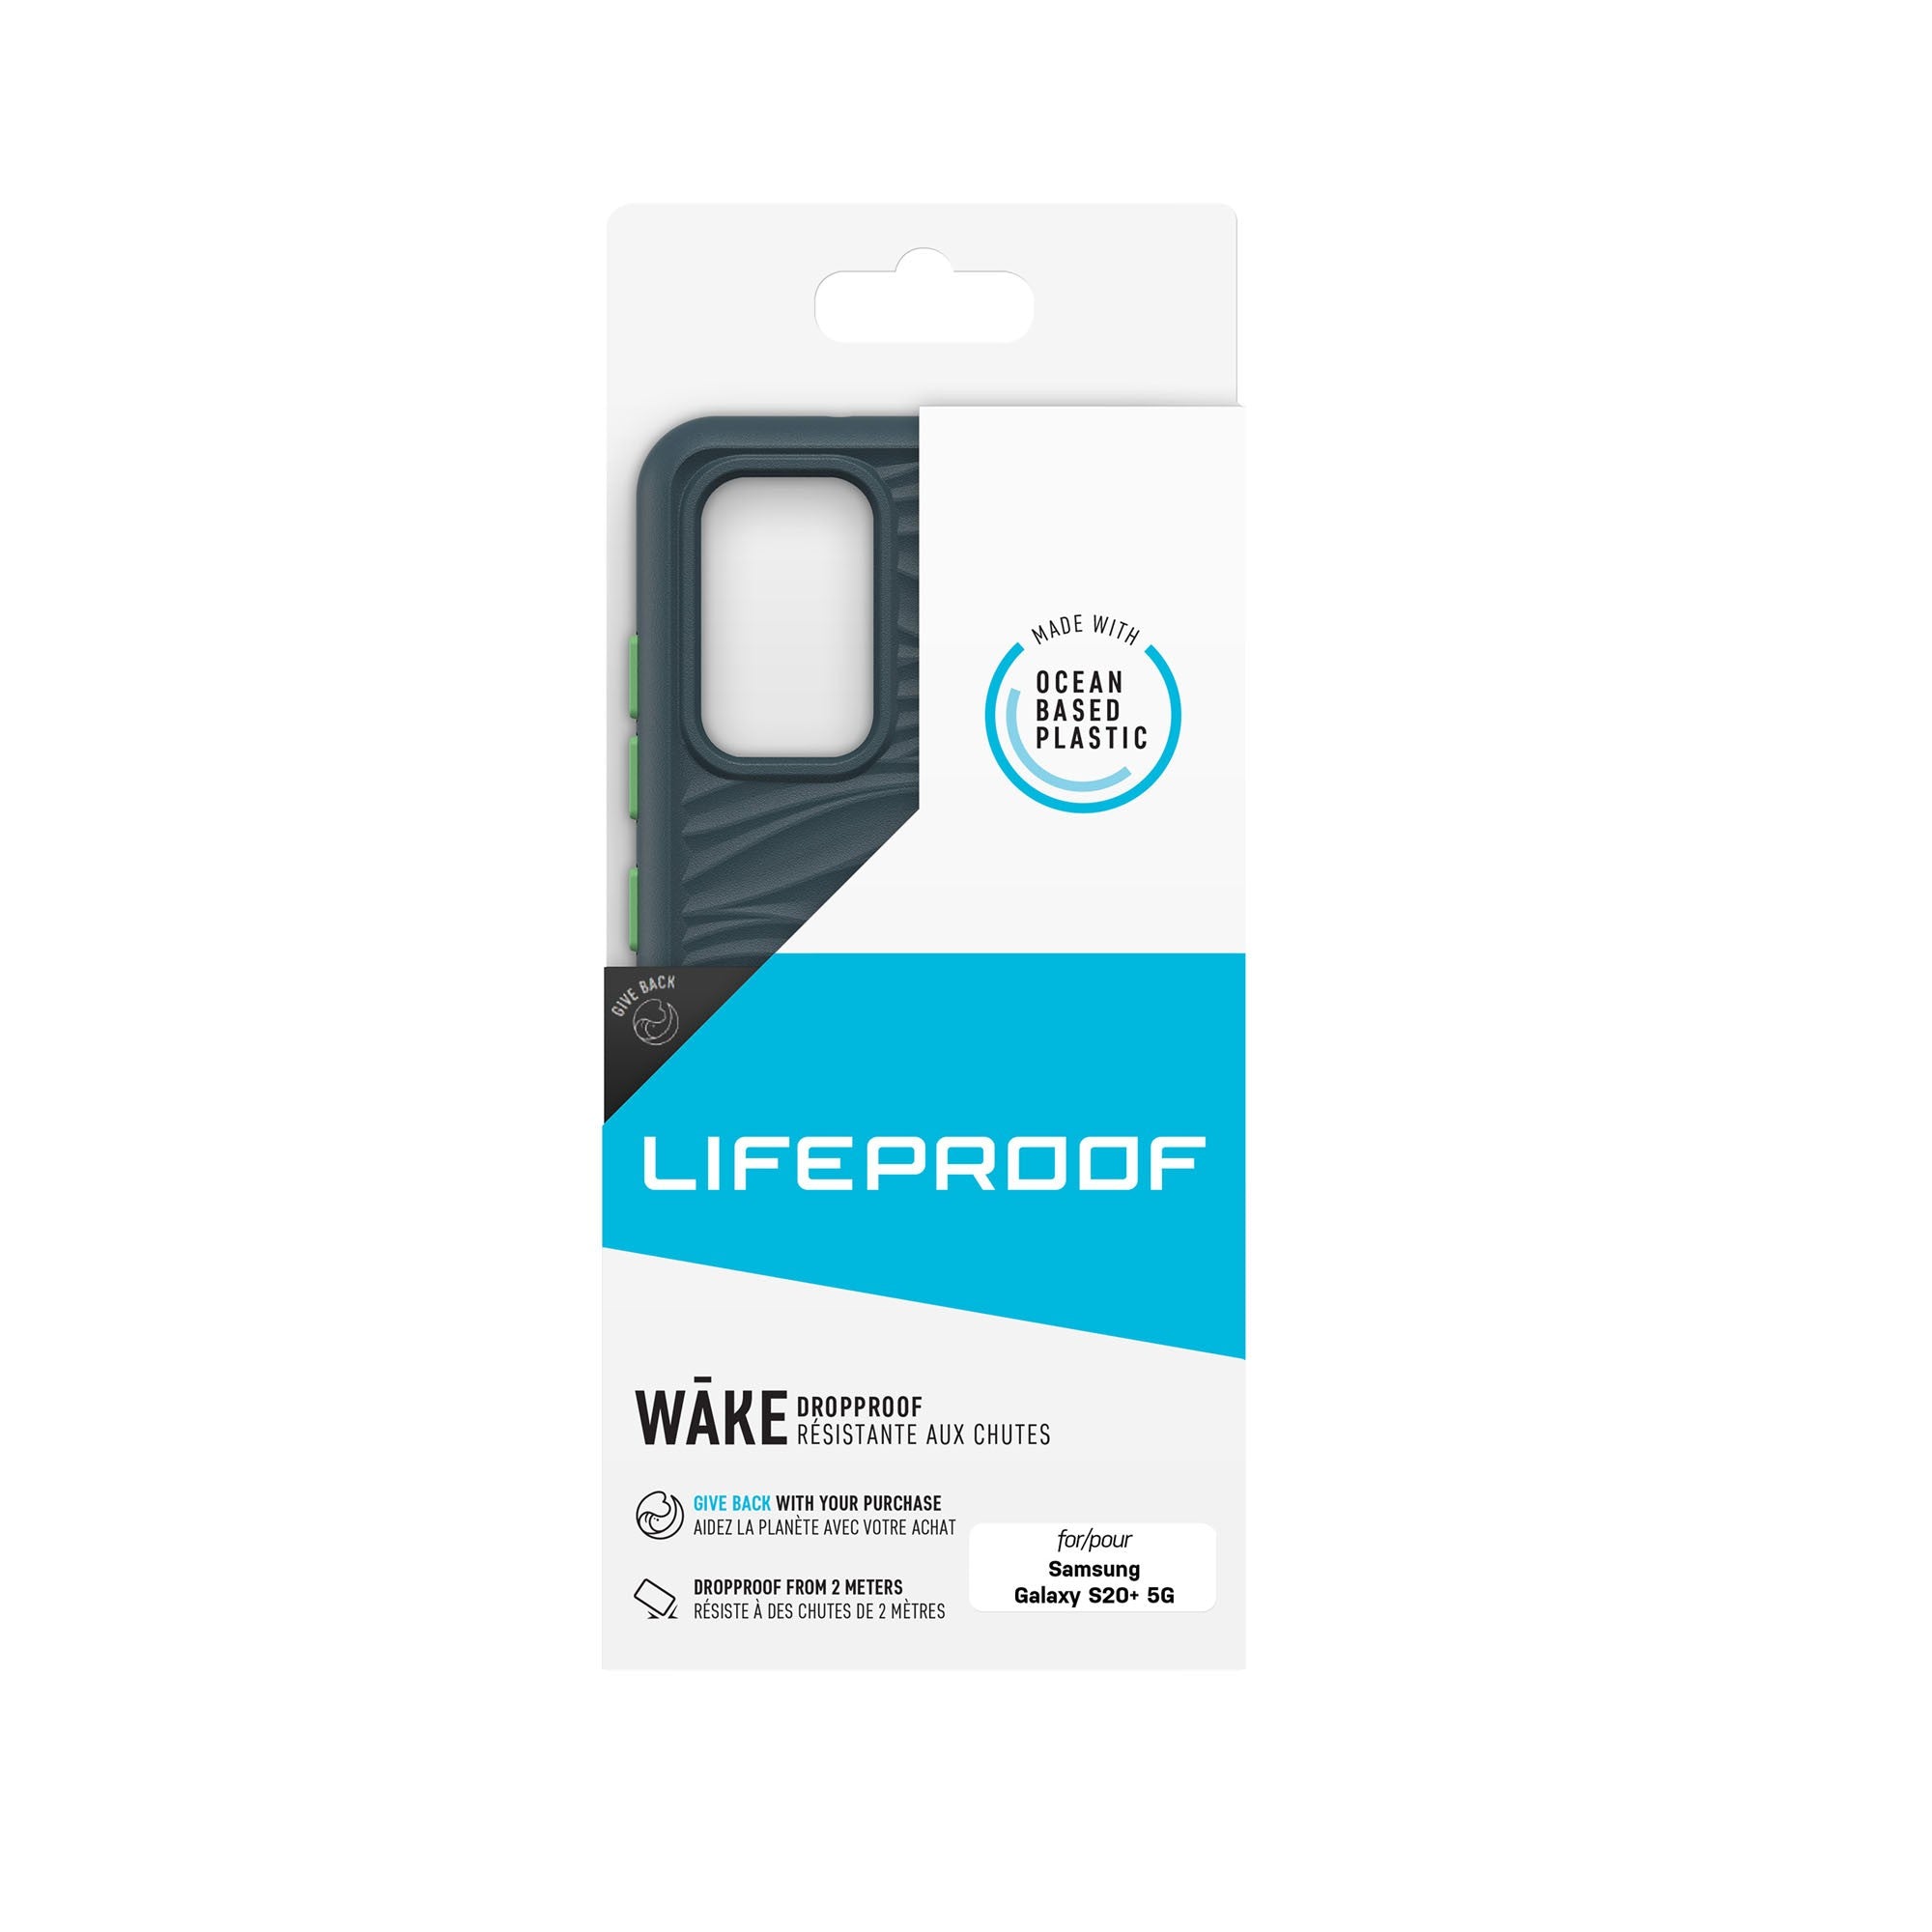 Samsung Galaxy S20+ 5G LifeProof Blue/Green (Neptune) Wake Recycled Plastic Case - 15-06957